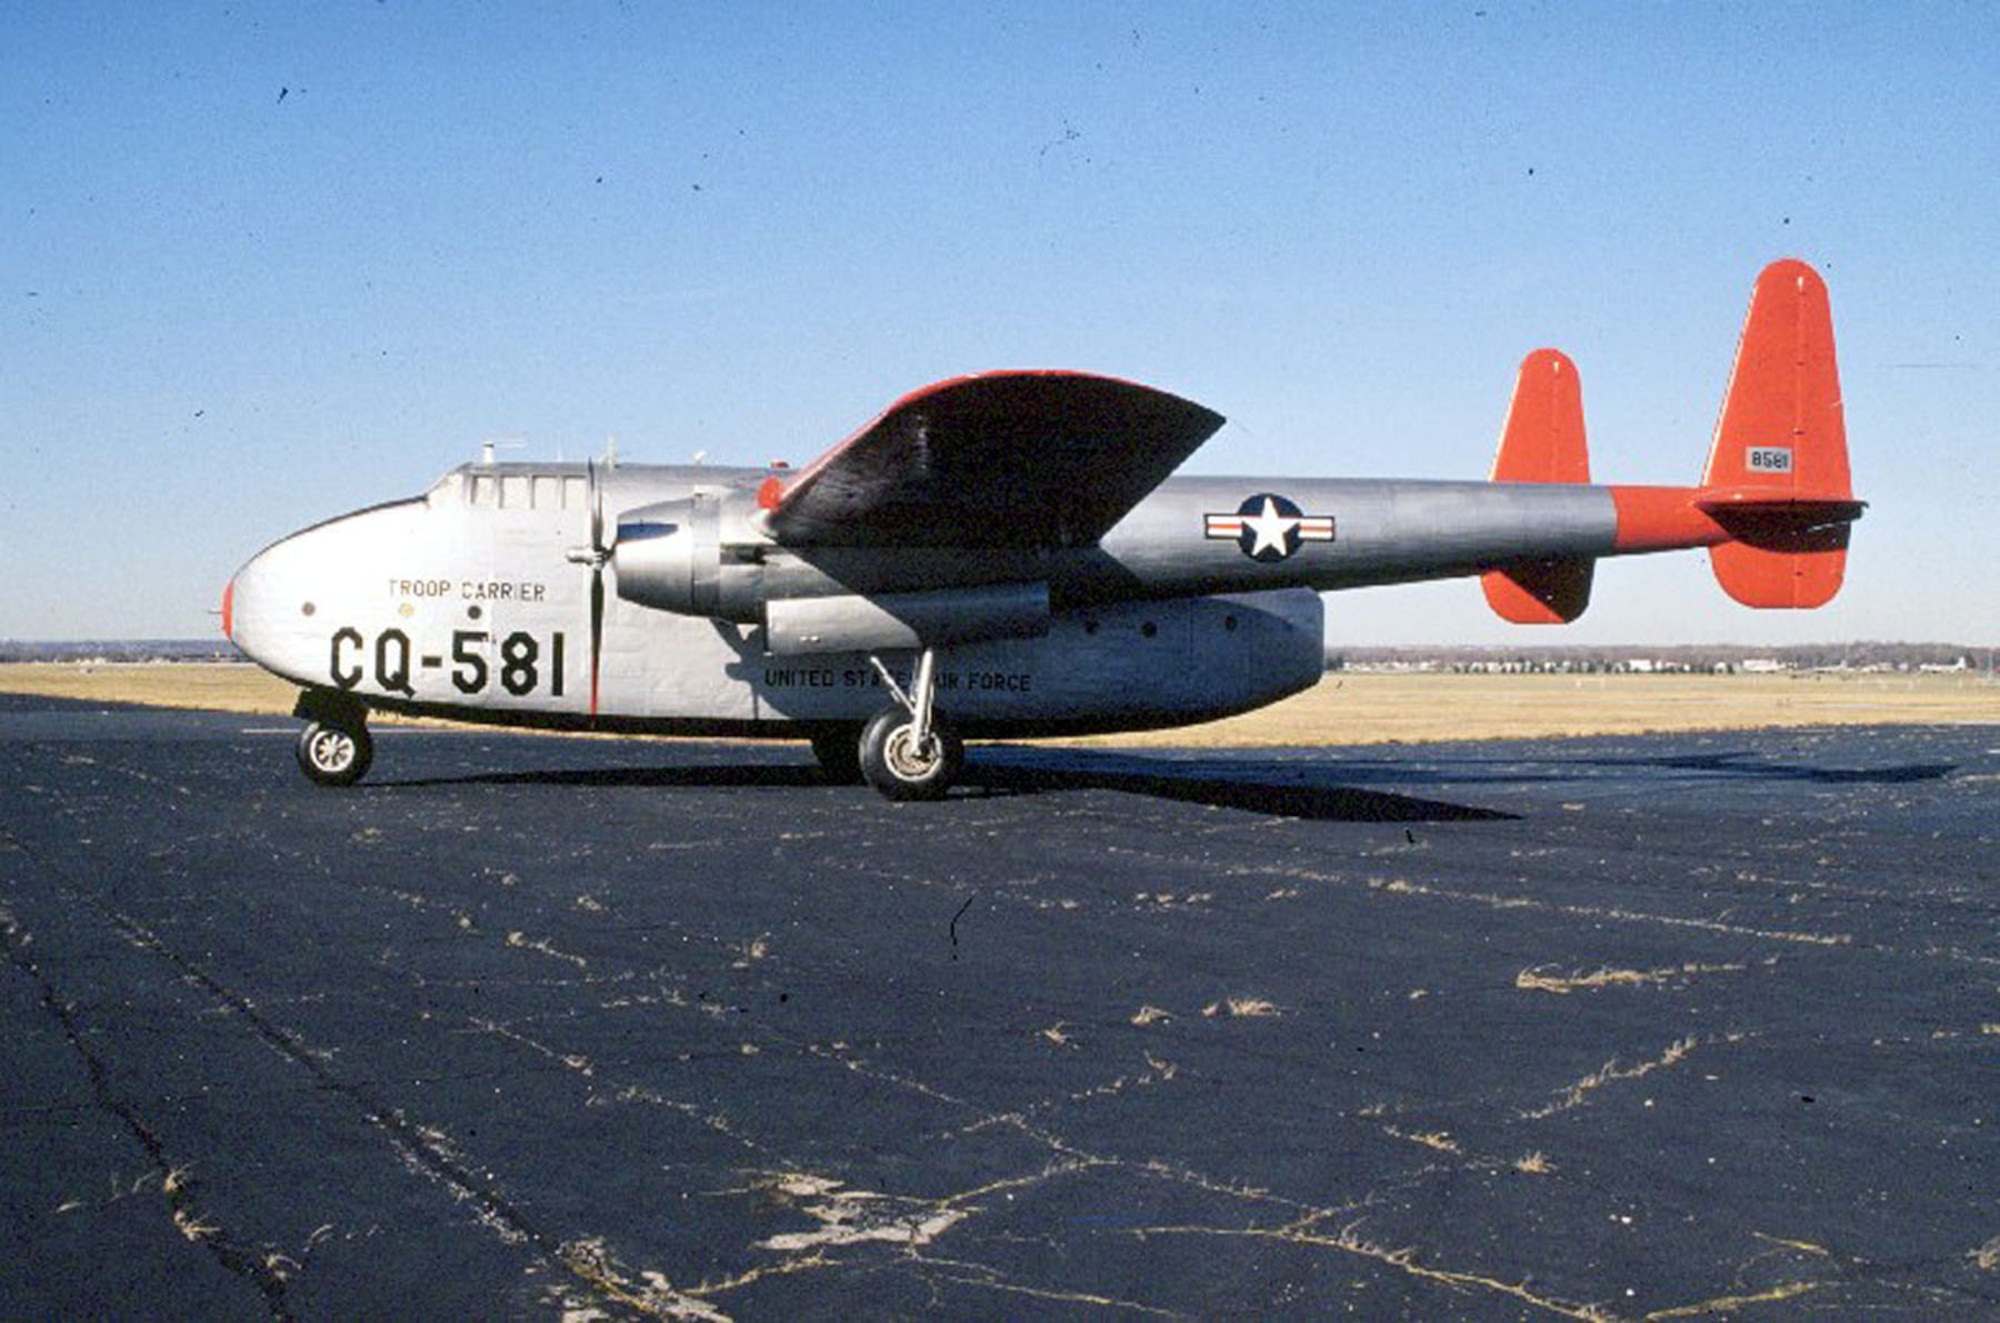 DAYTON, Ohio -- Fairchild C-82 Packet at the National Museum of the United States Air Force. (U.S. Air Force photo)